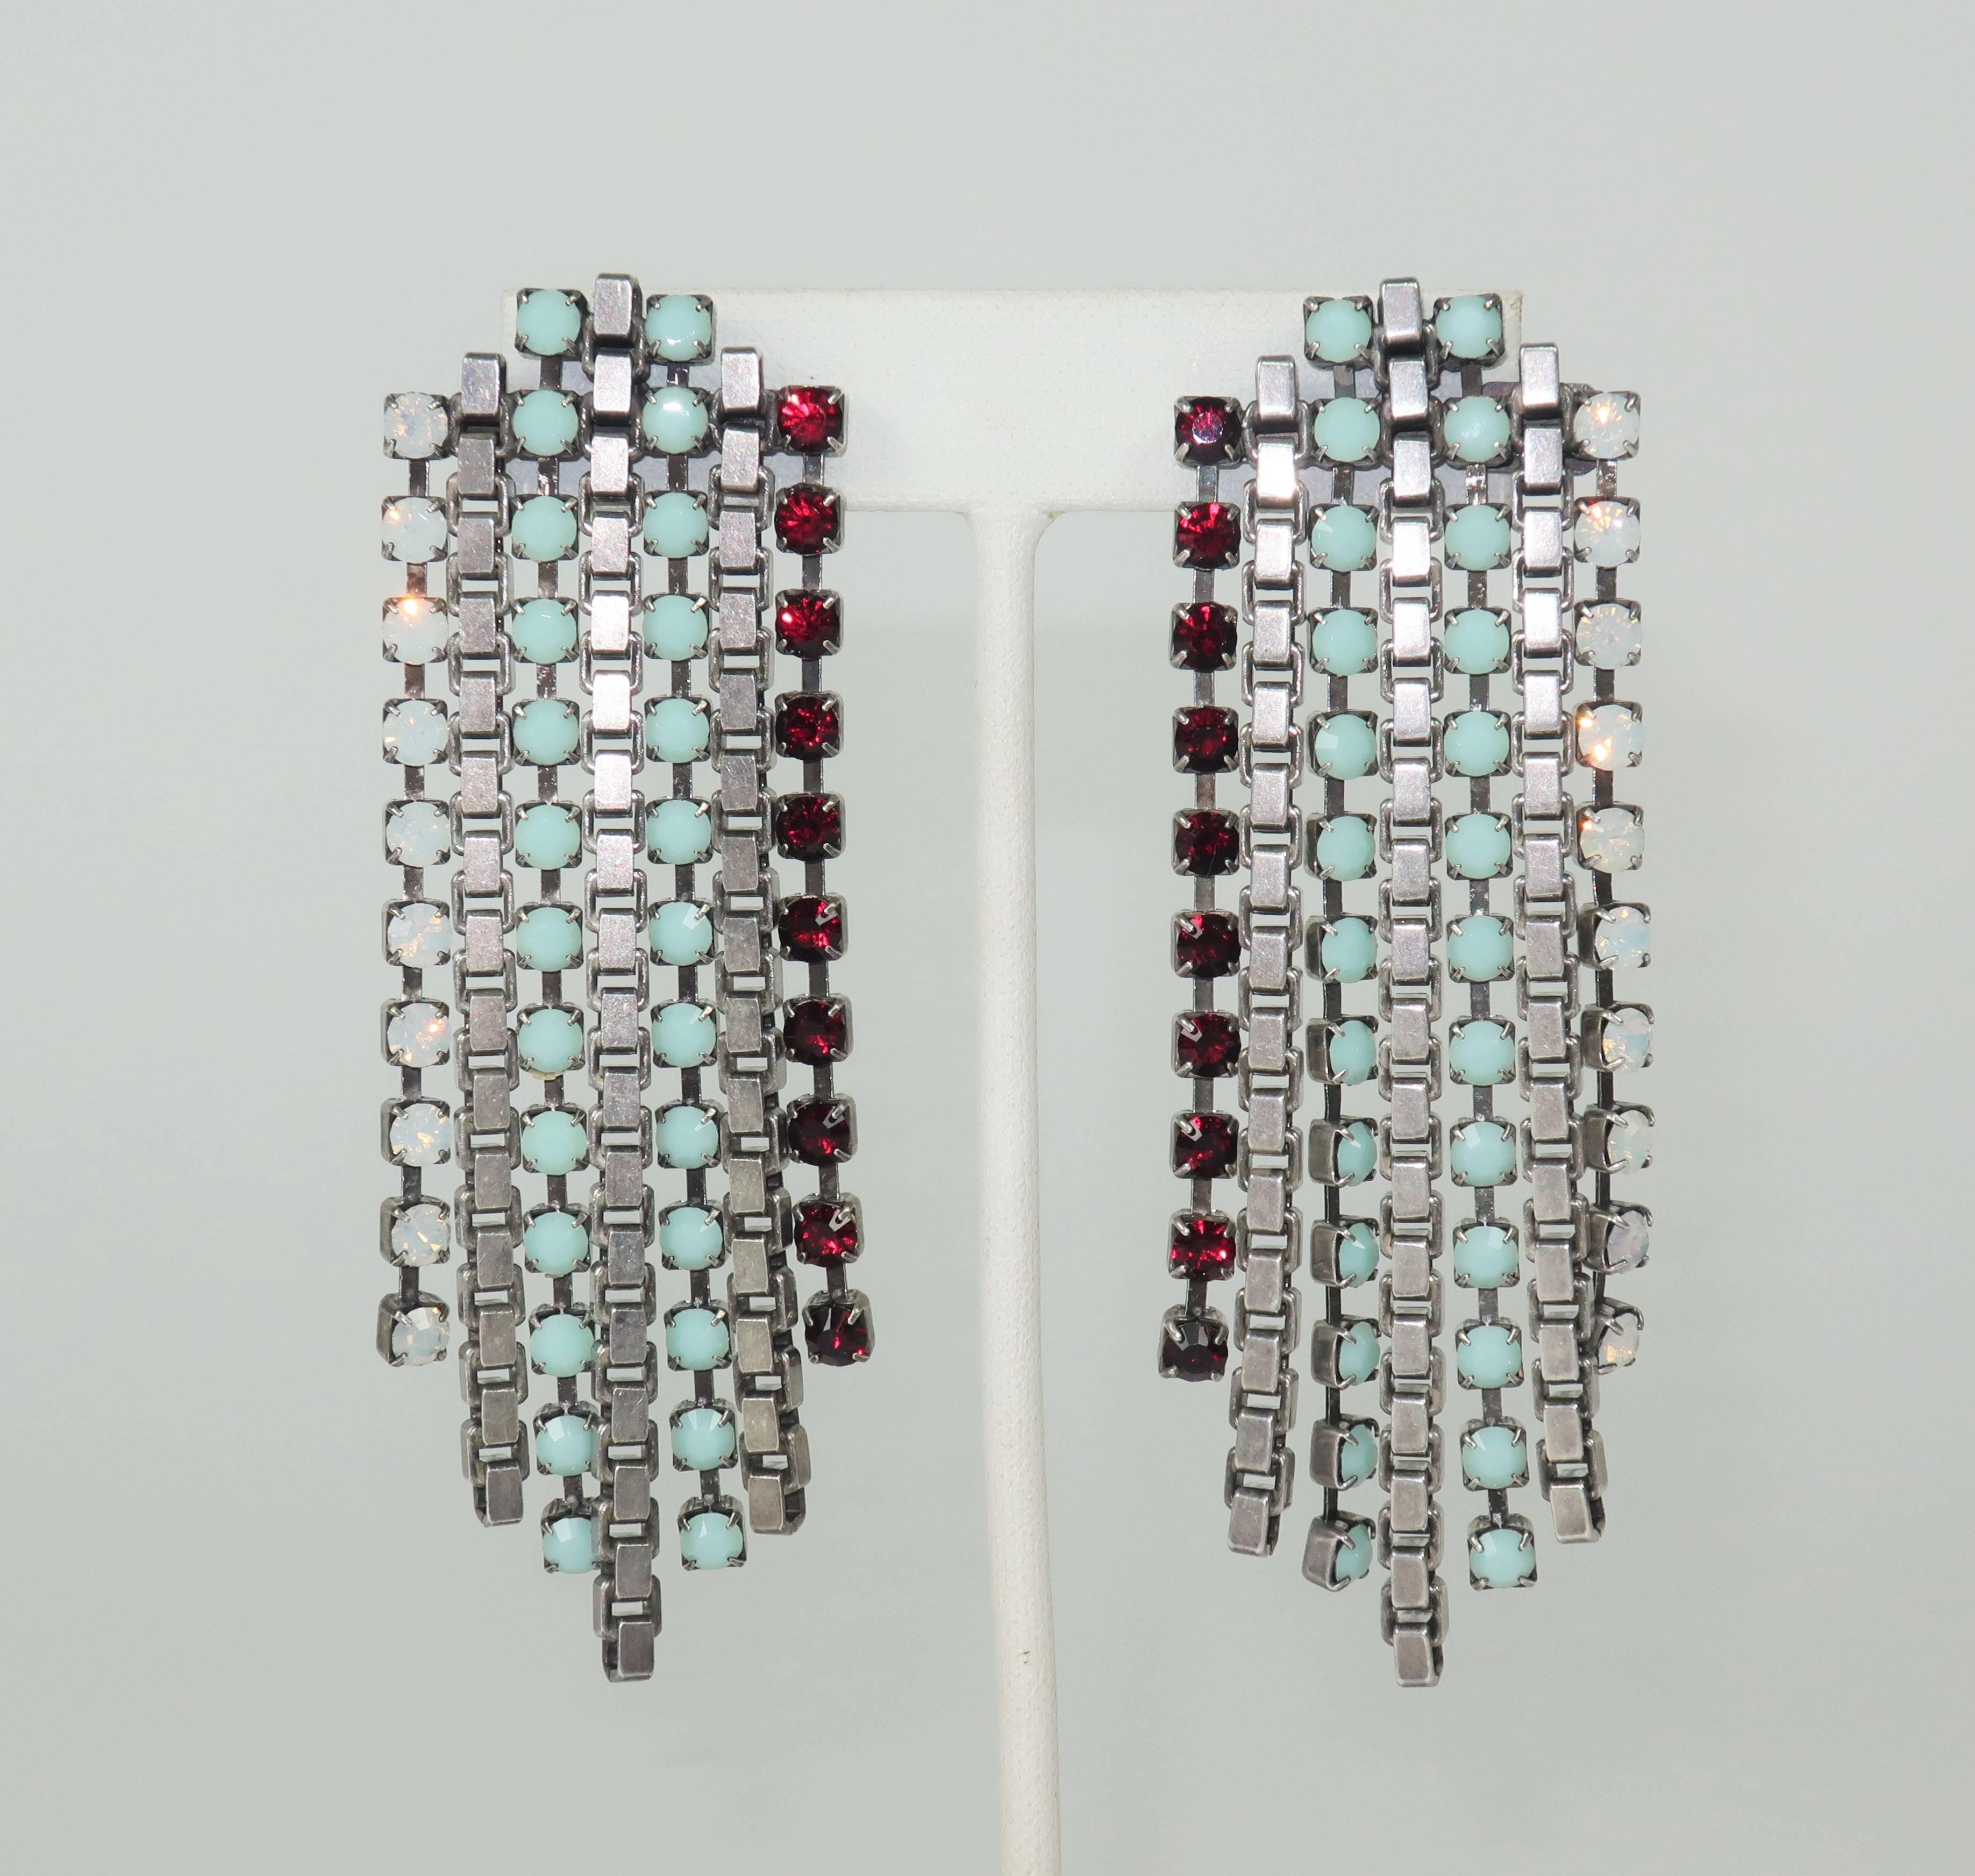 These pierced earrings by Dana Lorenz for her line, Fallon, are a stylish combination of glam and industrial aesthetics.  The waterfall silhouette is created by strands of dangling silver tone box chain interspersed with garnet, mint green and opal